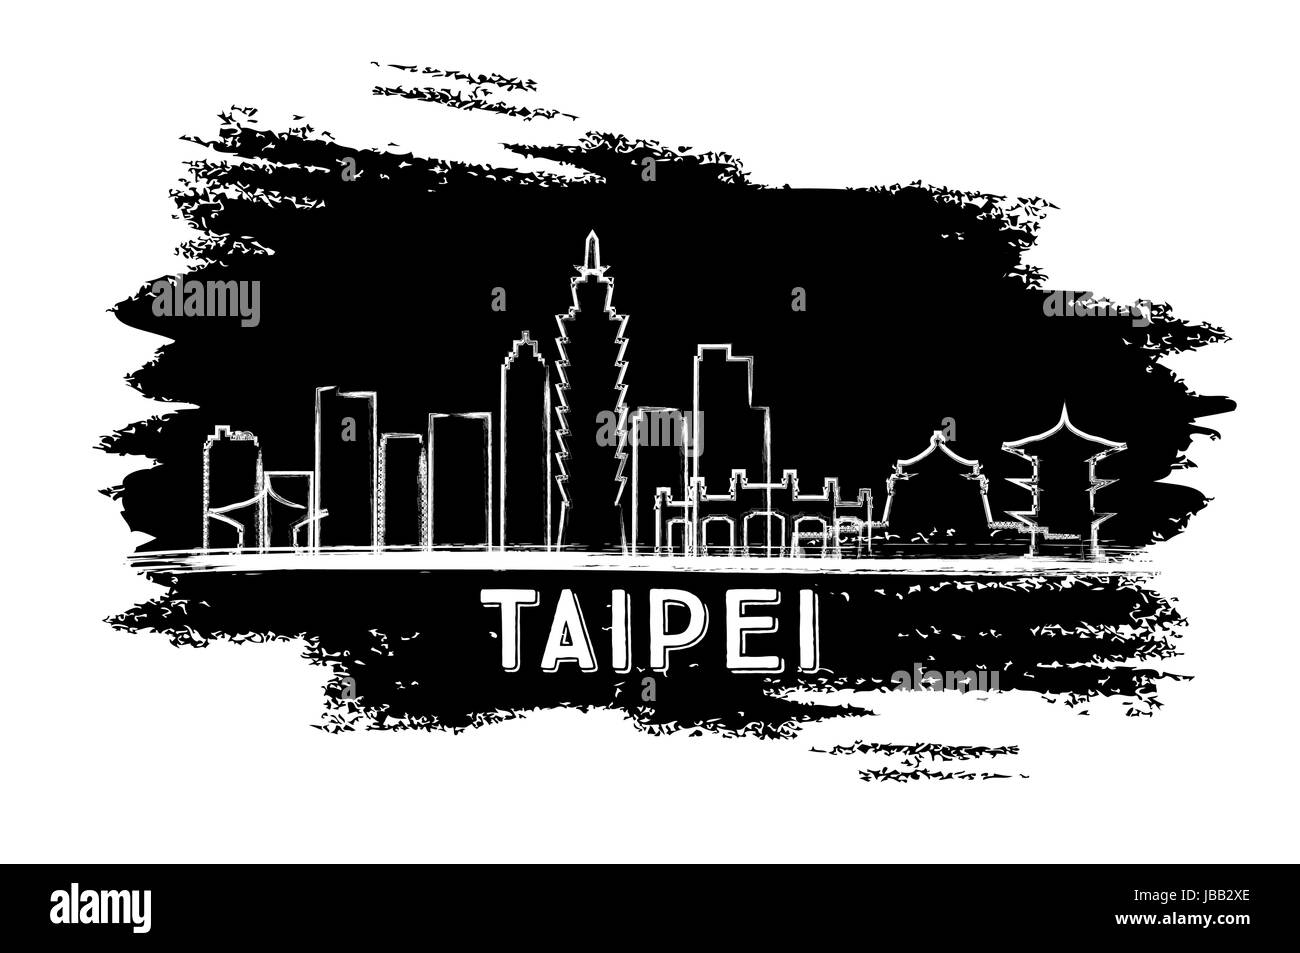 Taipei Skyline Silhouette. Hand Drawn Sketch. Vector Illustration. Business Travel and Tourism Concept with Modern Architecture. Stock Vector